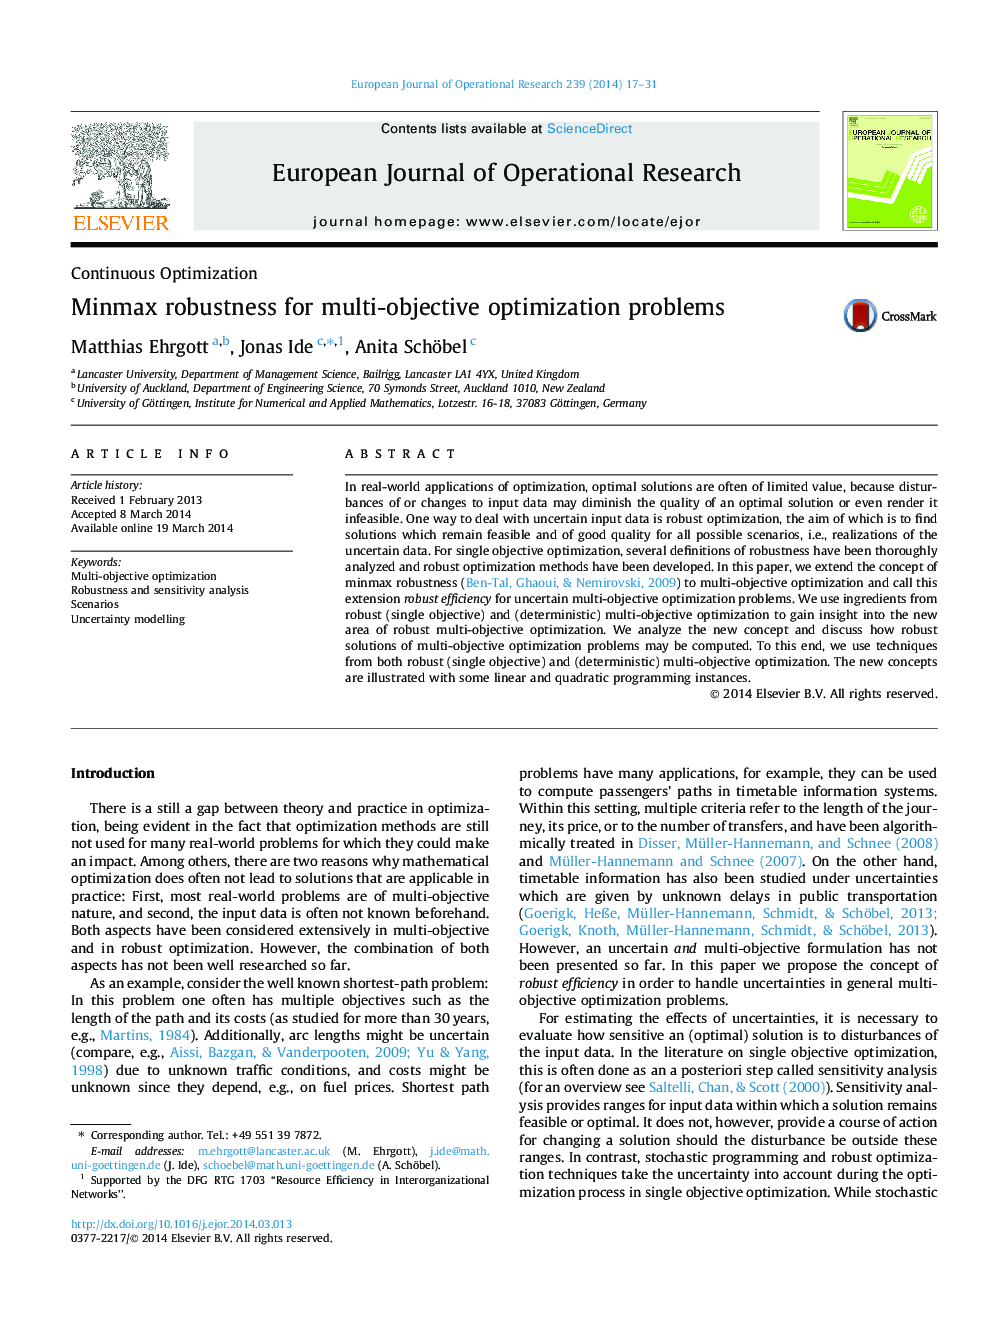 Minmax robustness for multi-objective optimization problems